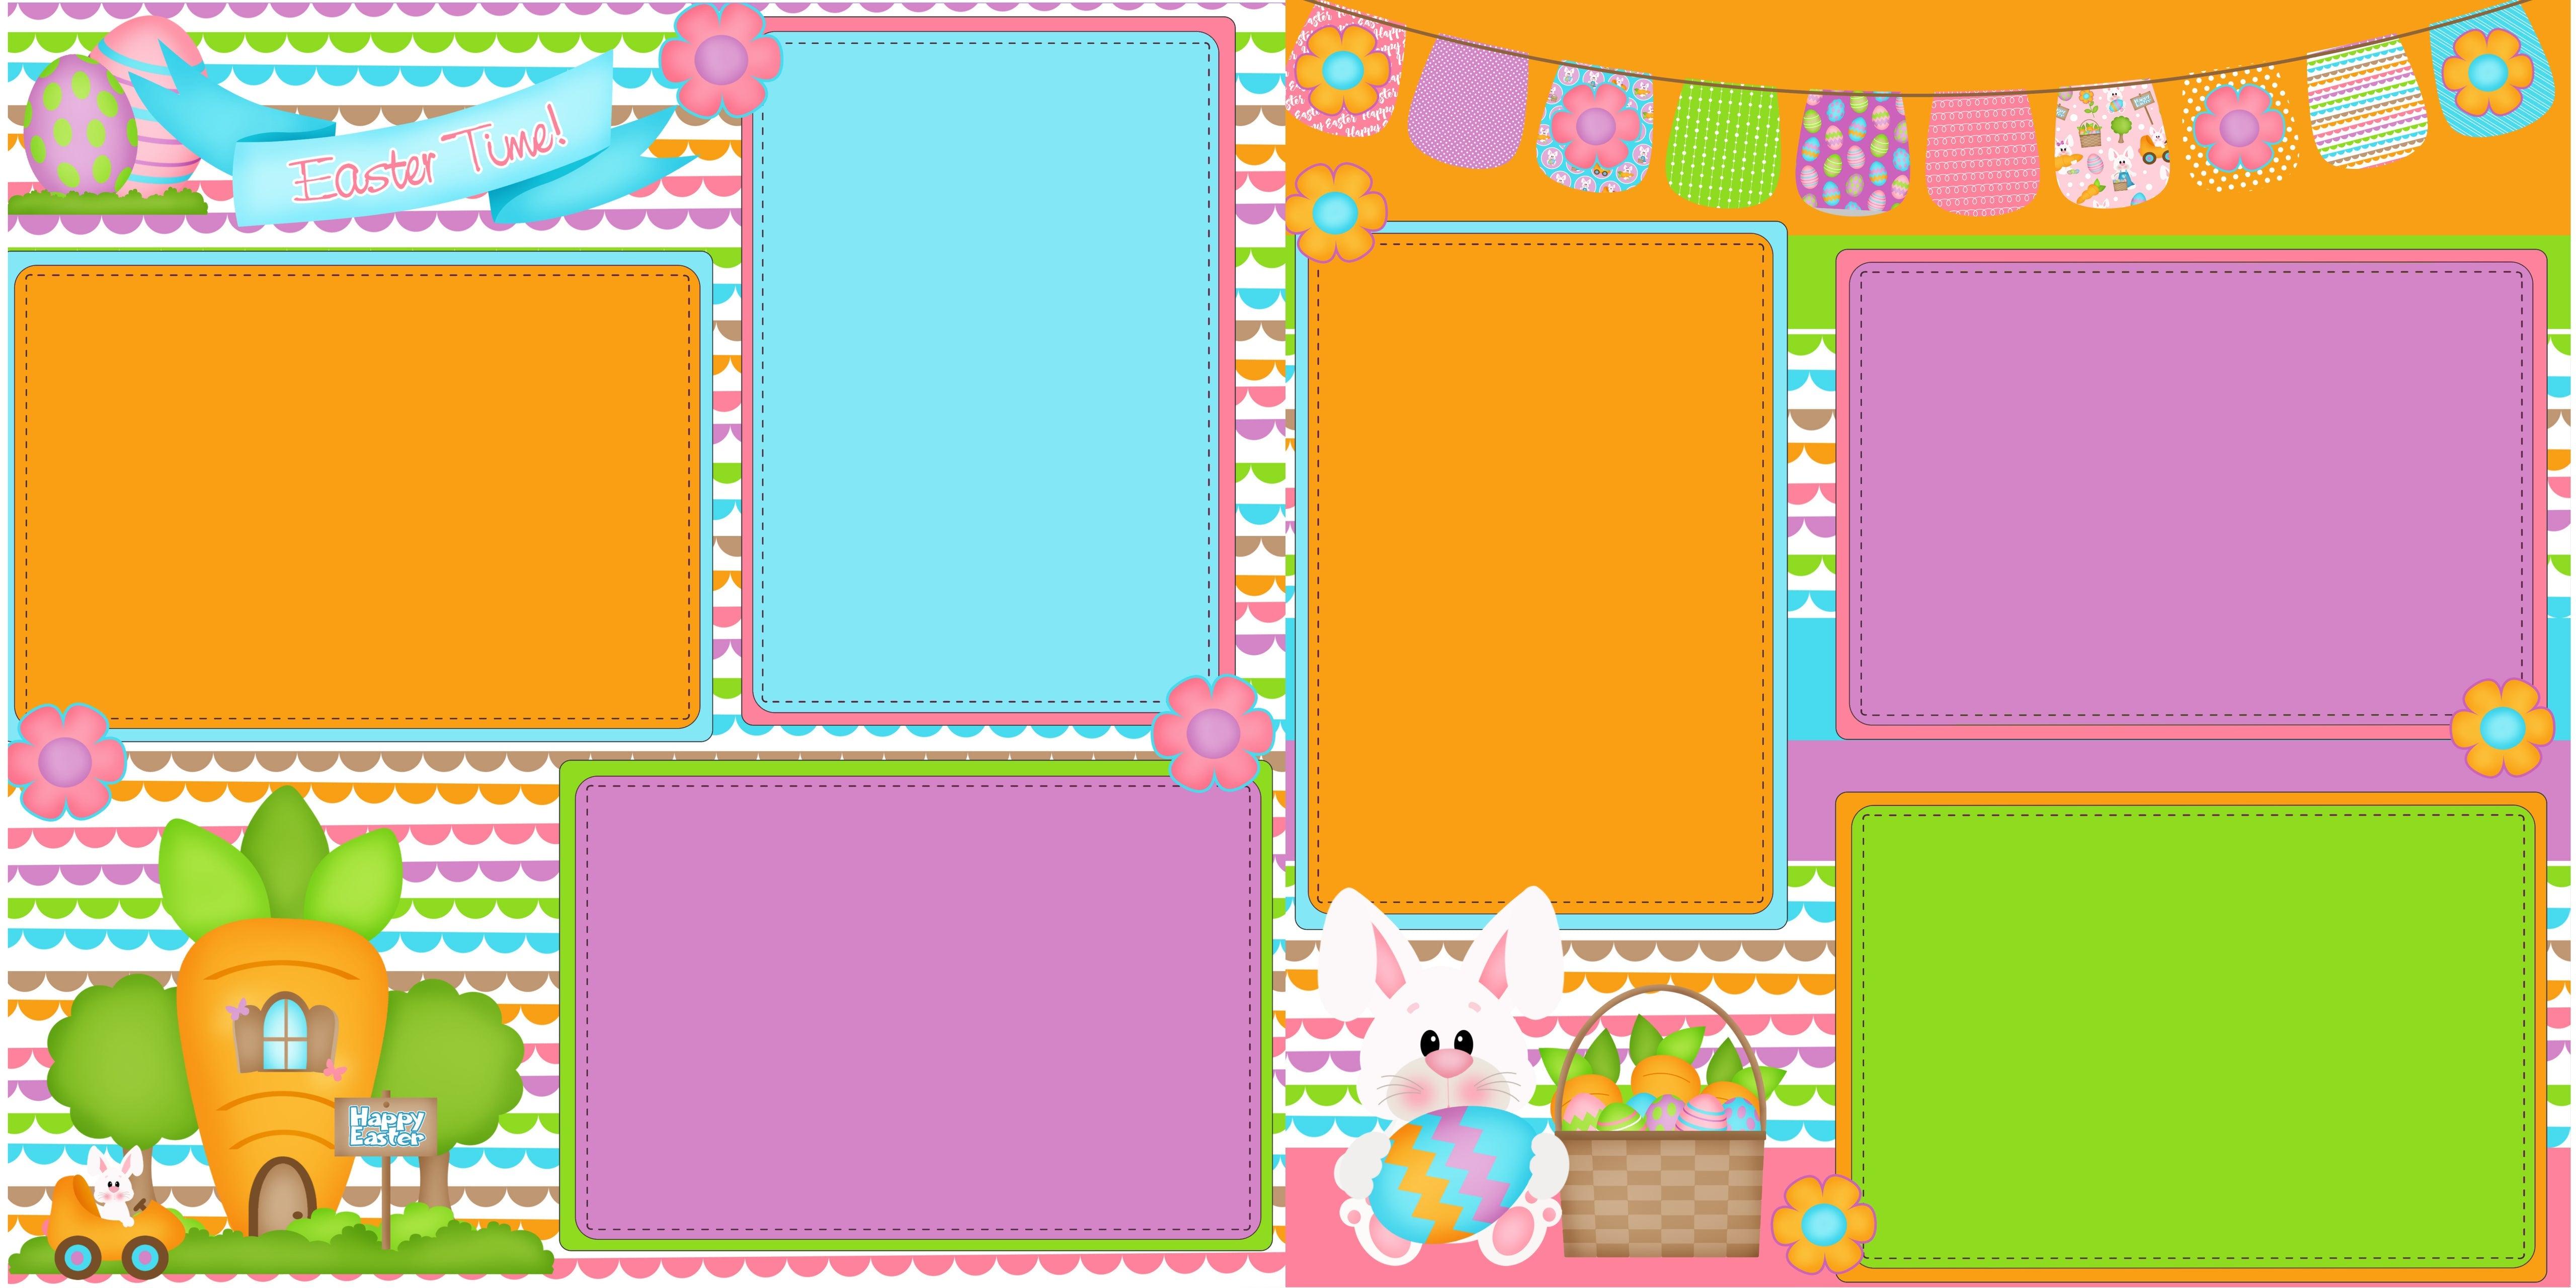 Easter Time Collection Happy Easter (2) - 12 x 12 Premade, Printed Scrapbook Pages by SSC Designs